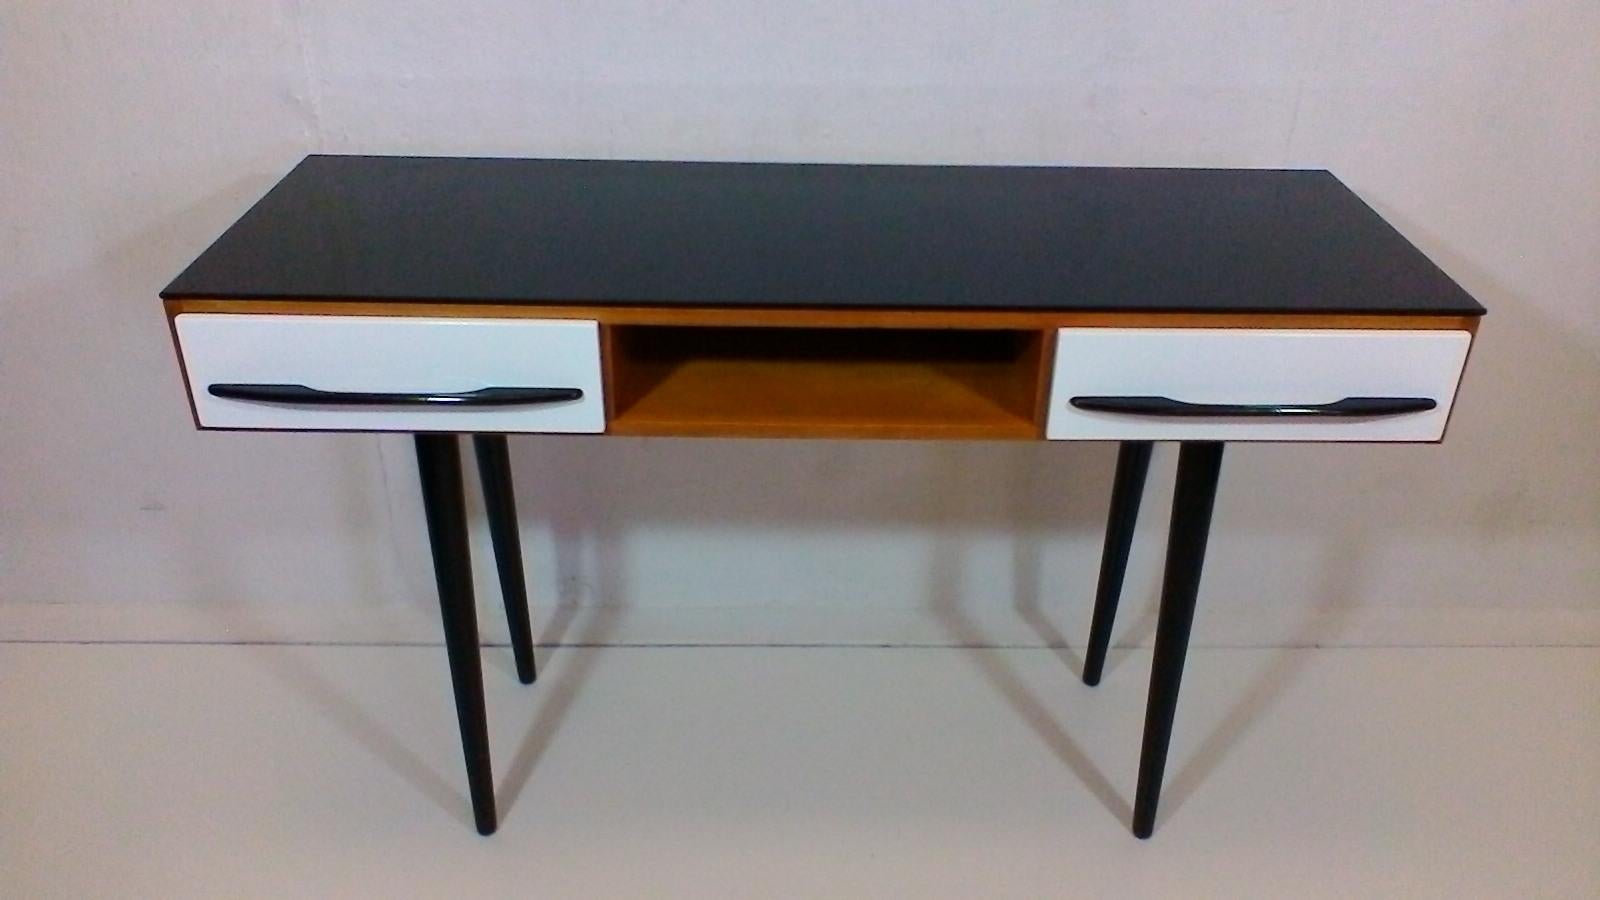 Czechoslovakia. The item is made of veneered and varnished wood, on upper surface is black opax glass, corpus is varnished quality polyurethane varnish. Drawers and legs are varnished into the original colors- black and white in high gloss. Complete